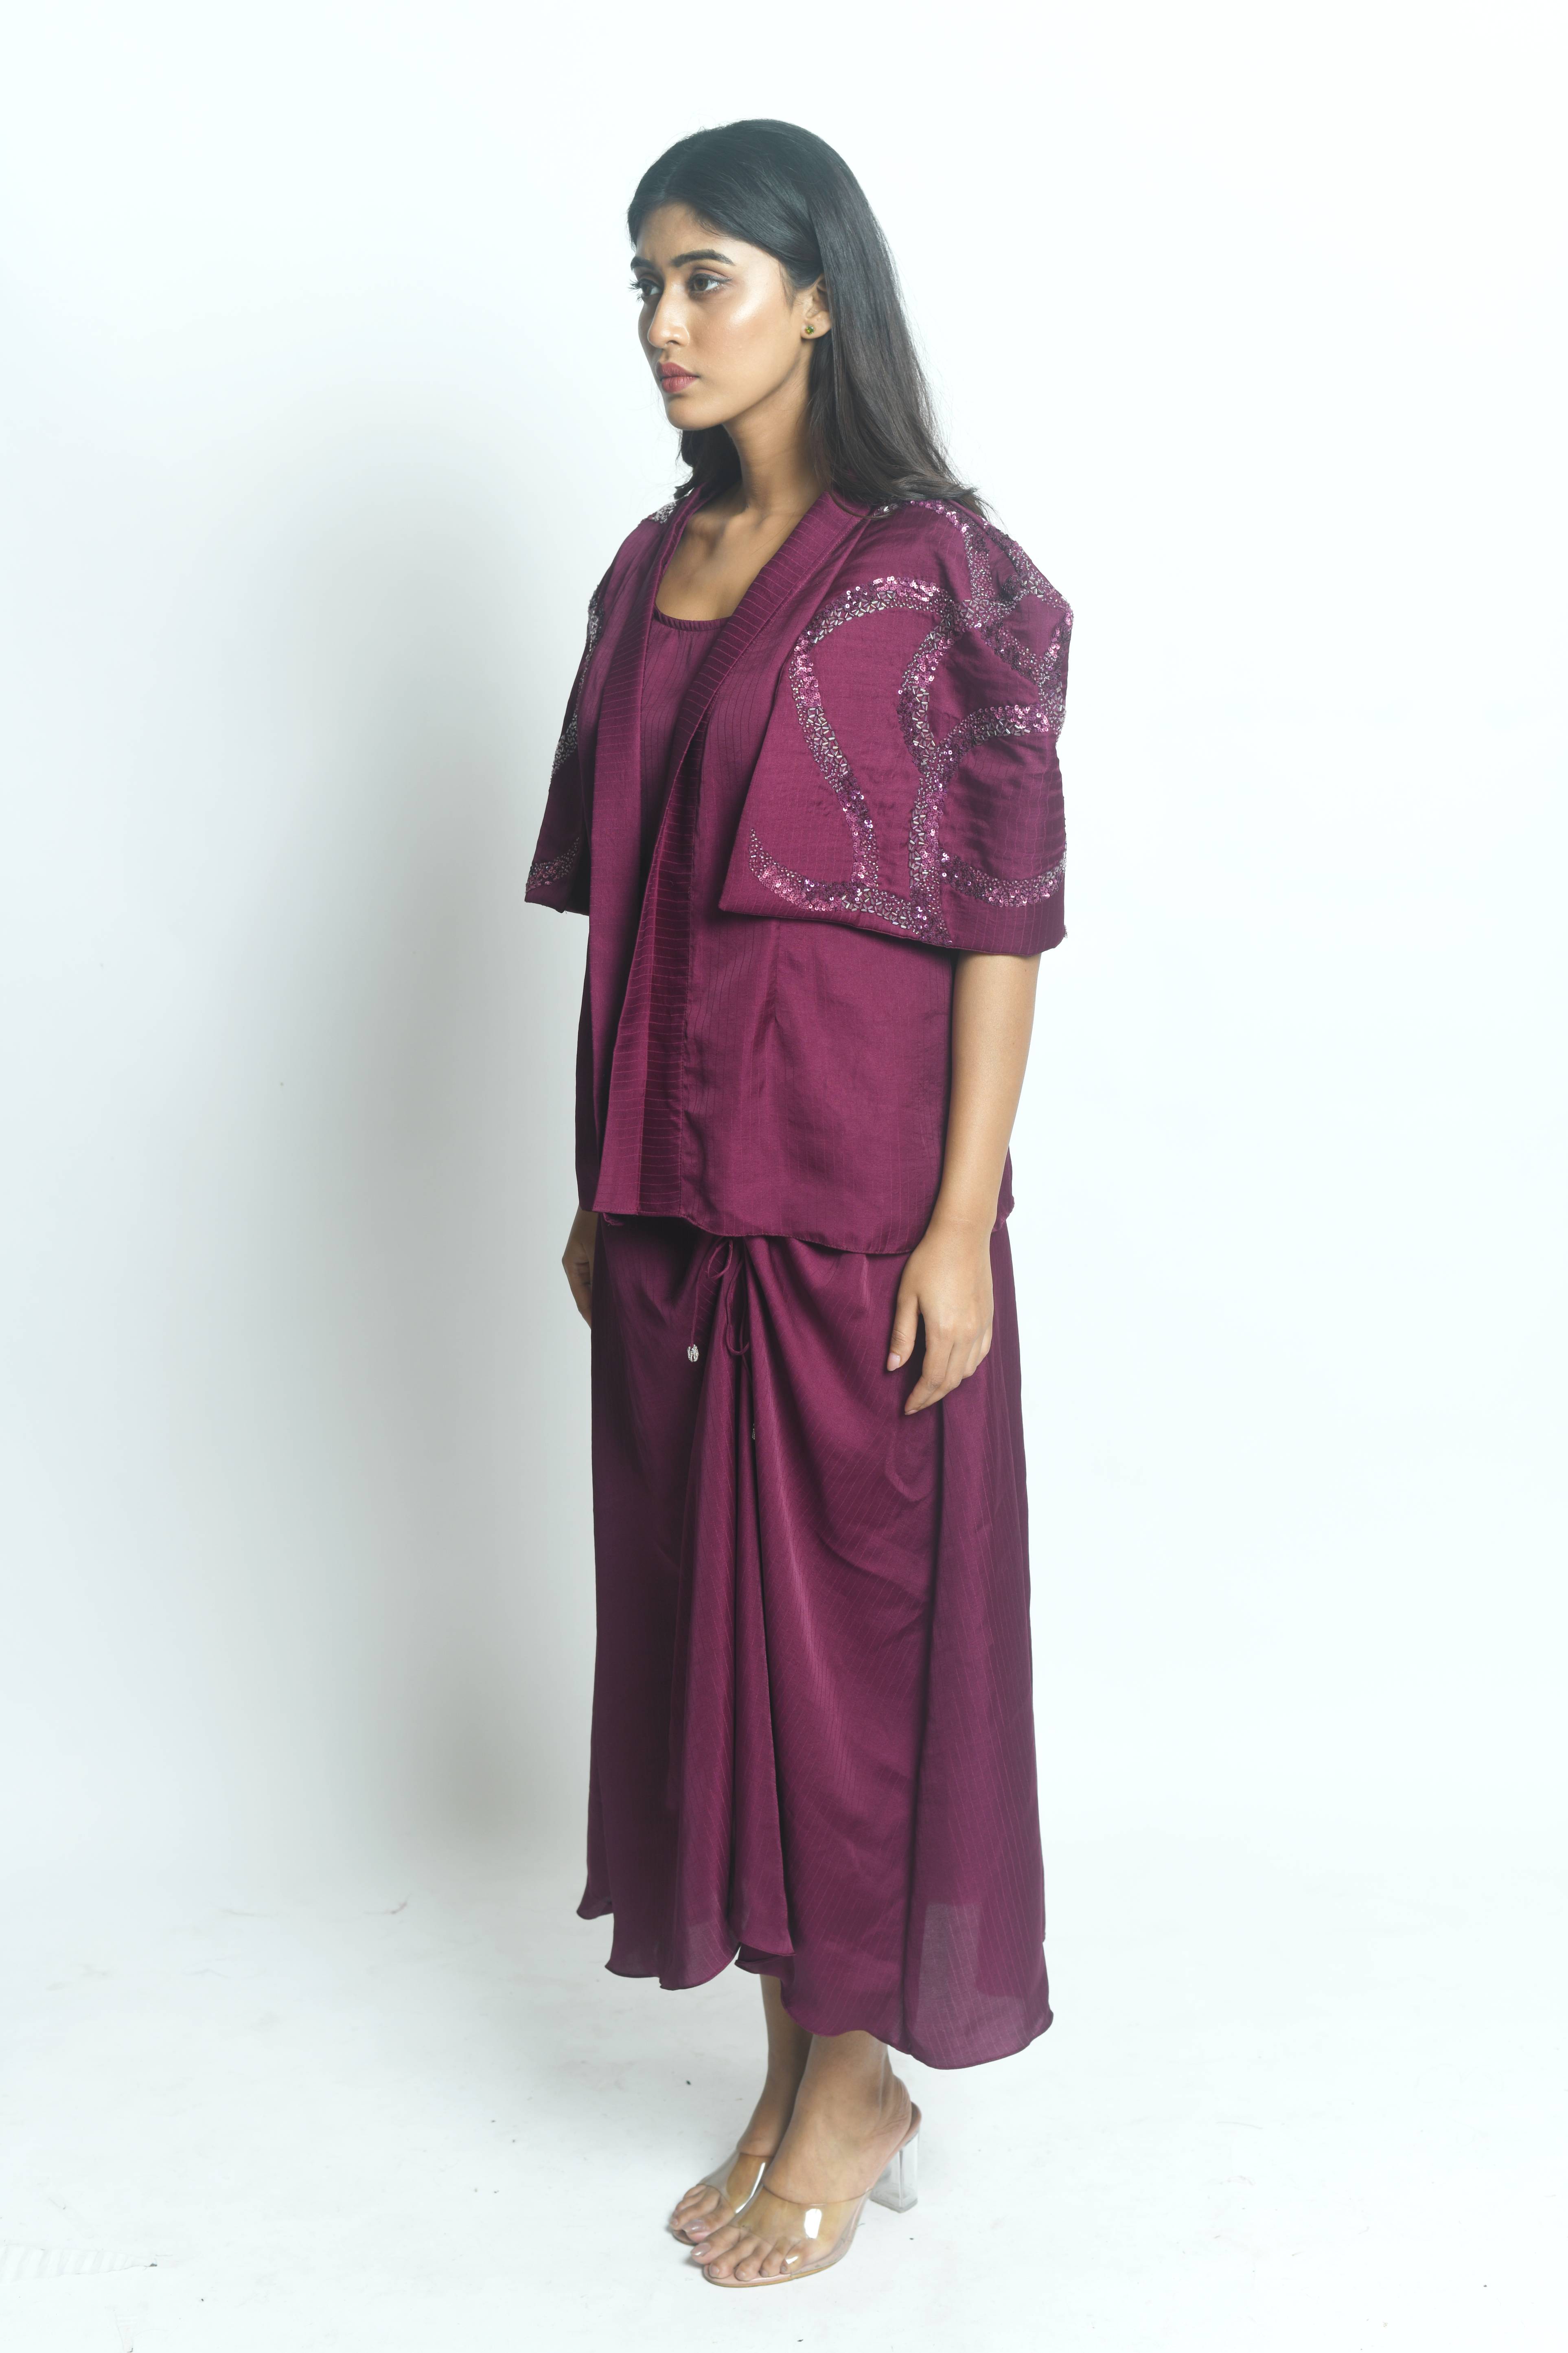 Tucked-in slip dress with Embellished jacket - 1476